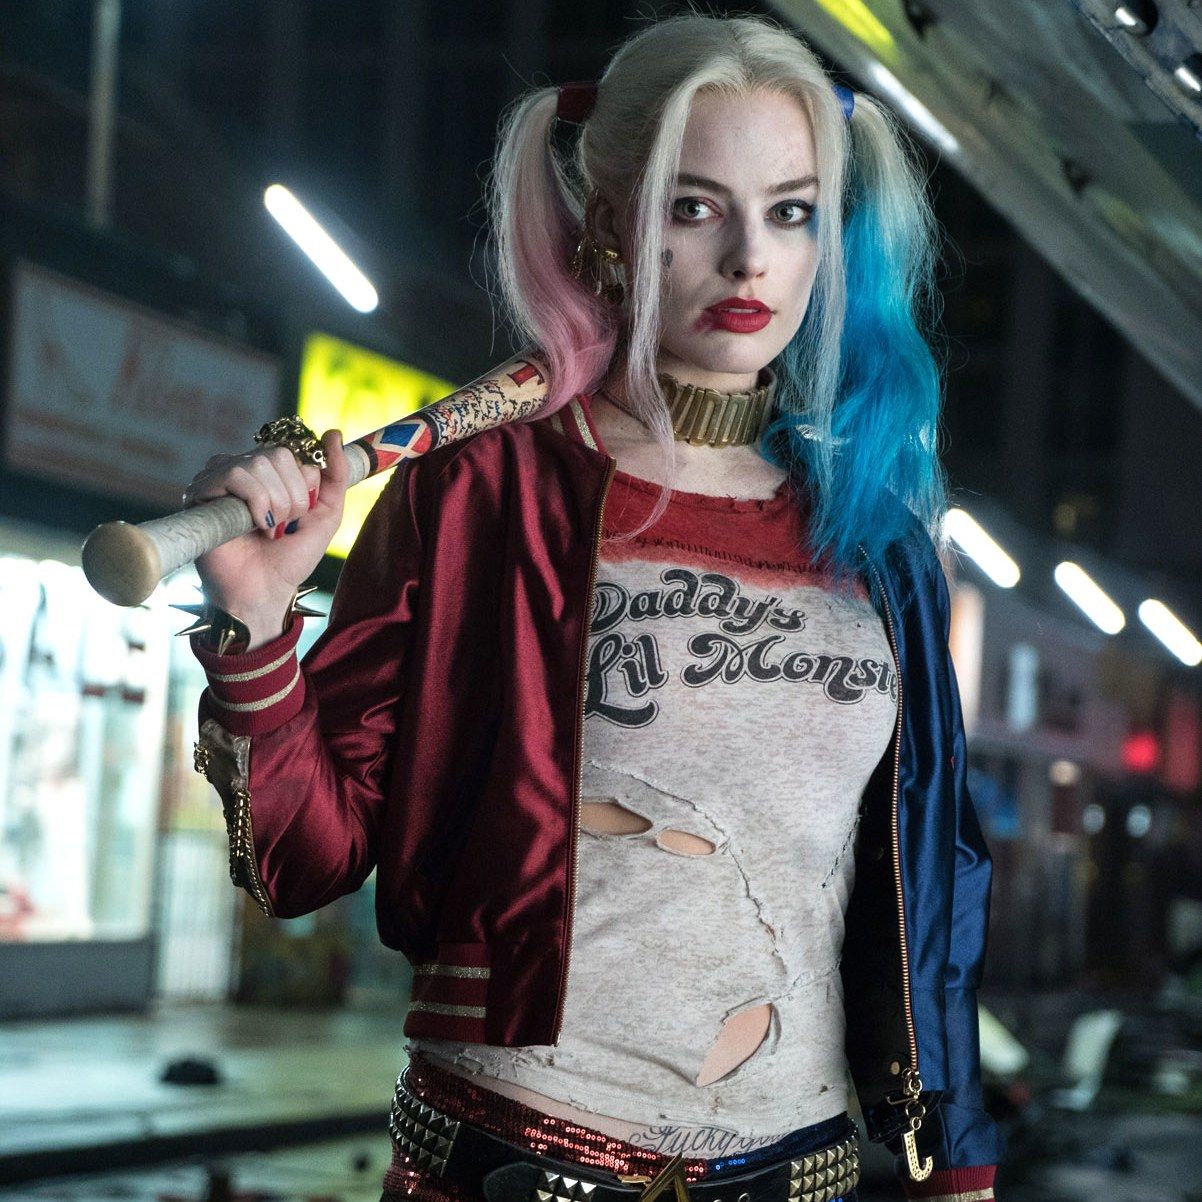 James Gunn Confirms All-Star Cast of The Suicide Squad